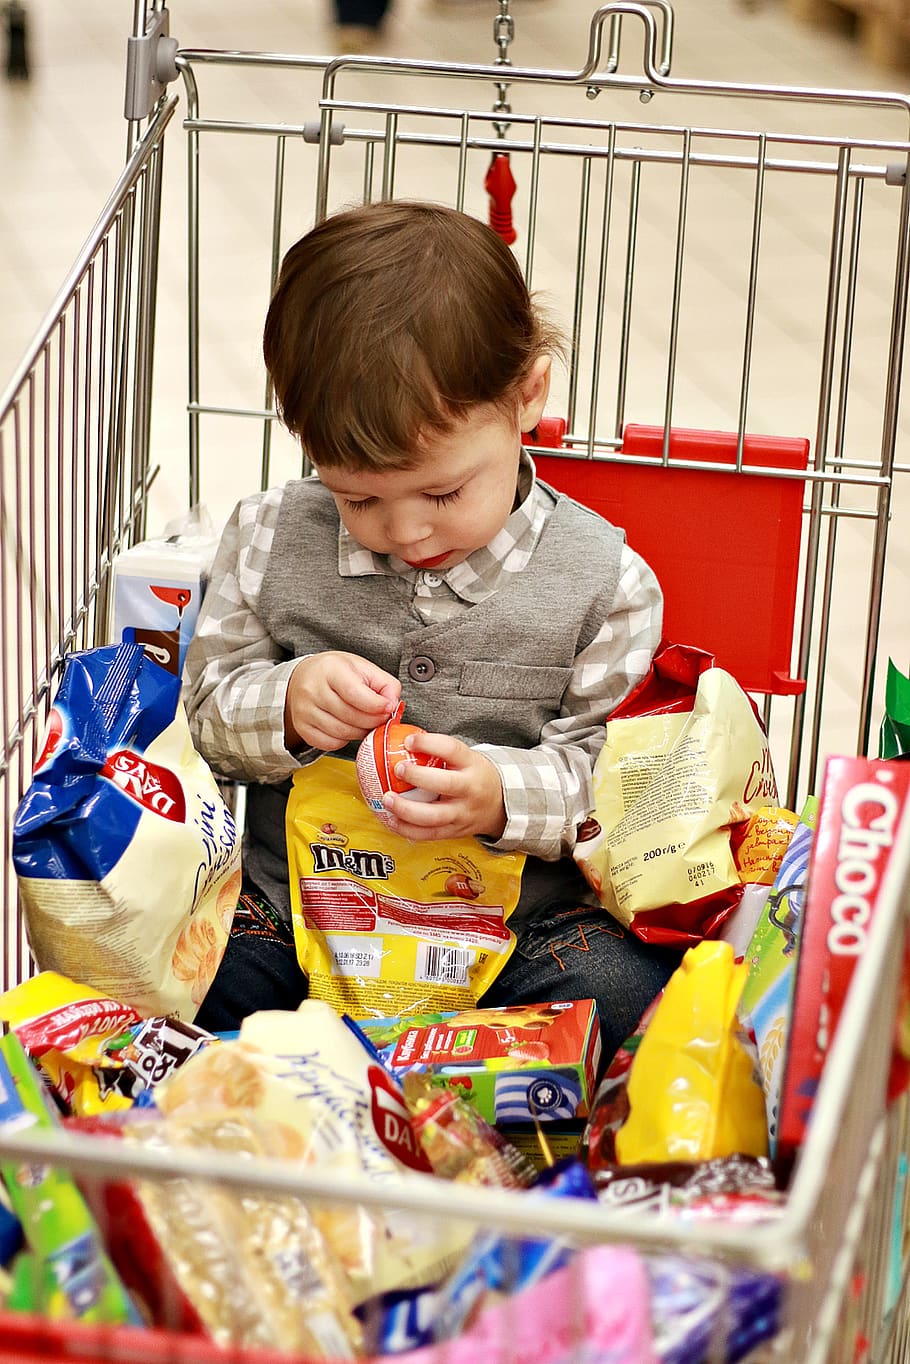 cart with products, sweets, baby, purchase, shop, supermarket, shopping center, brands, chocolate, candy